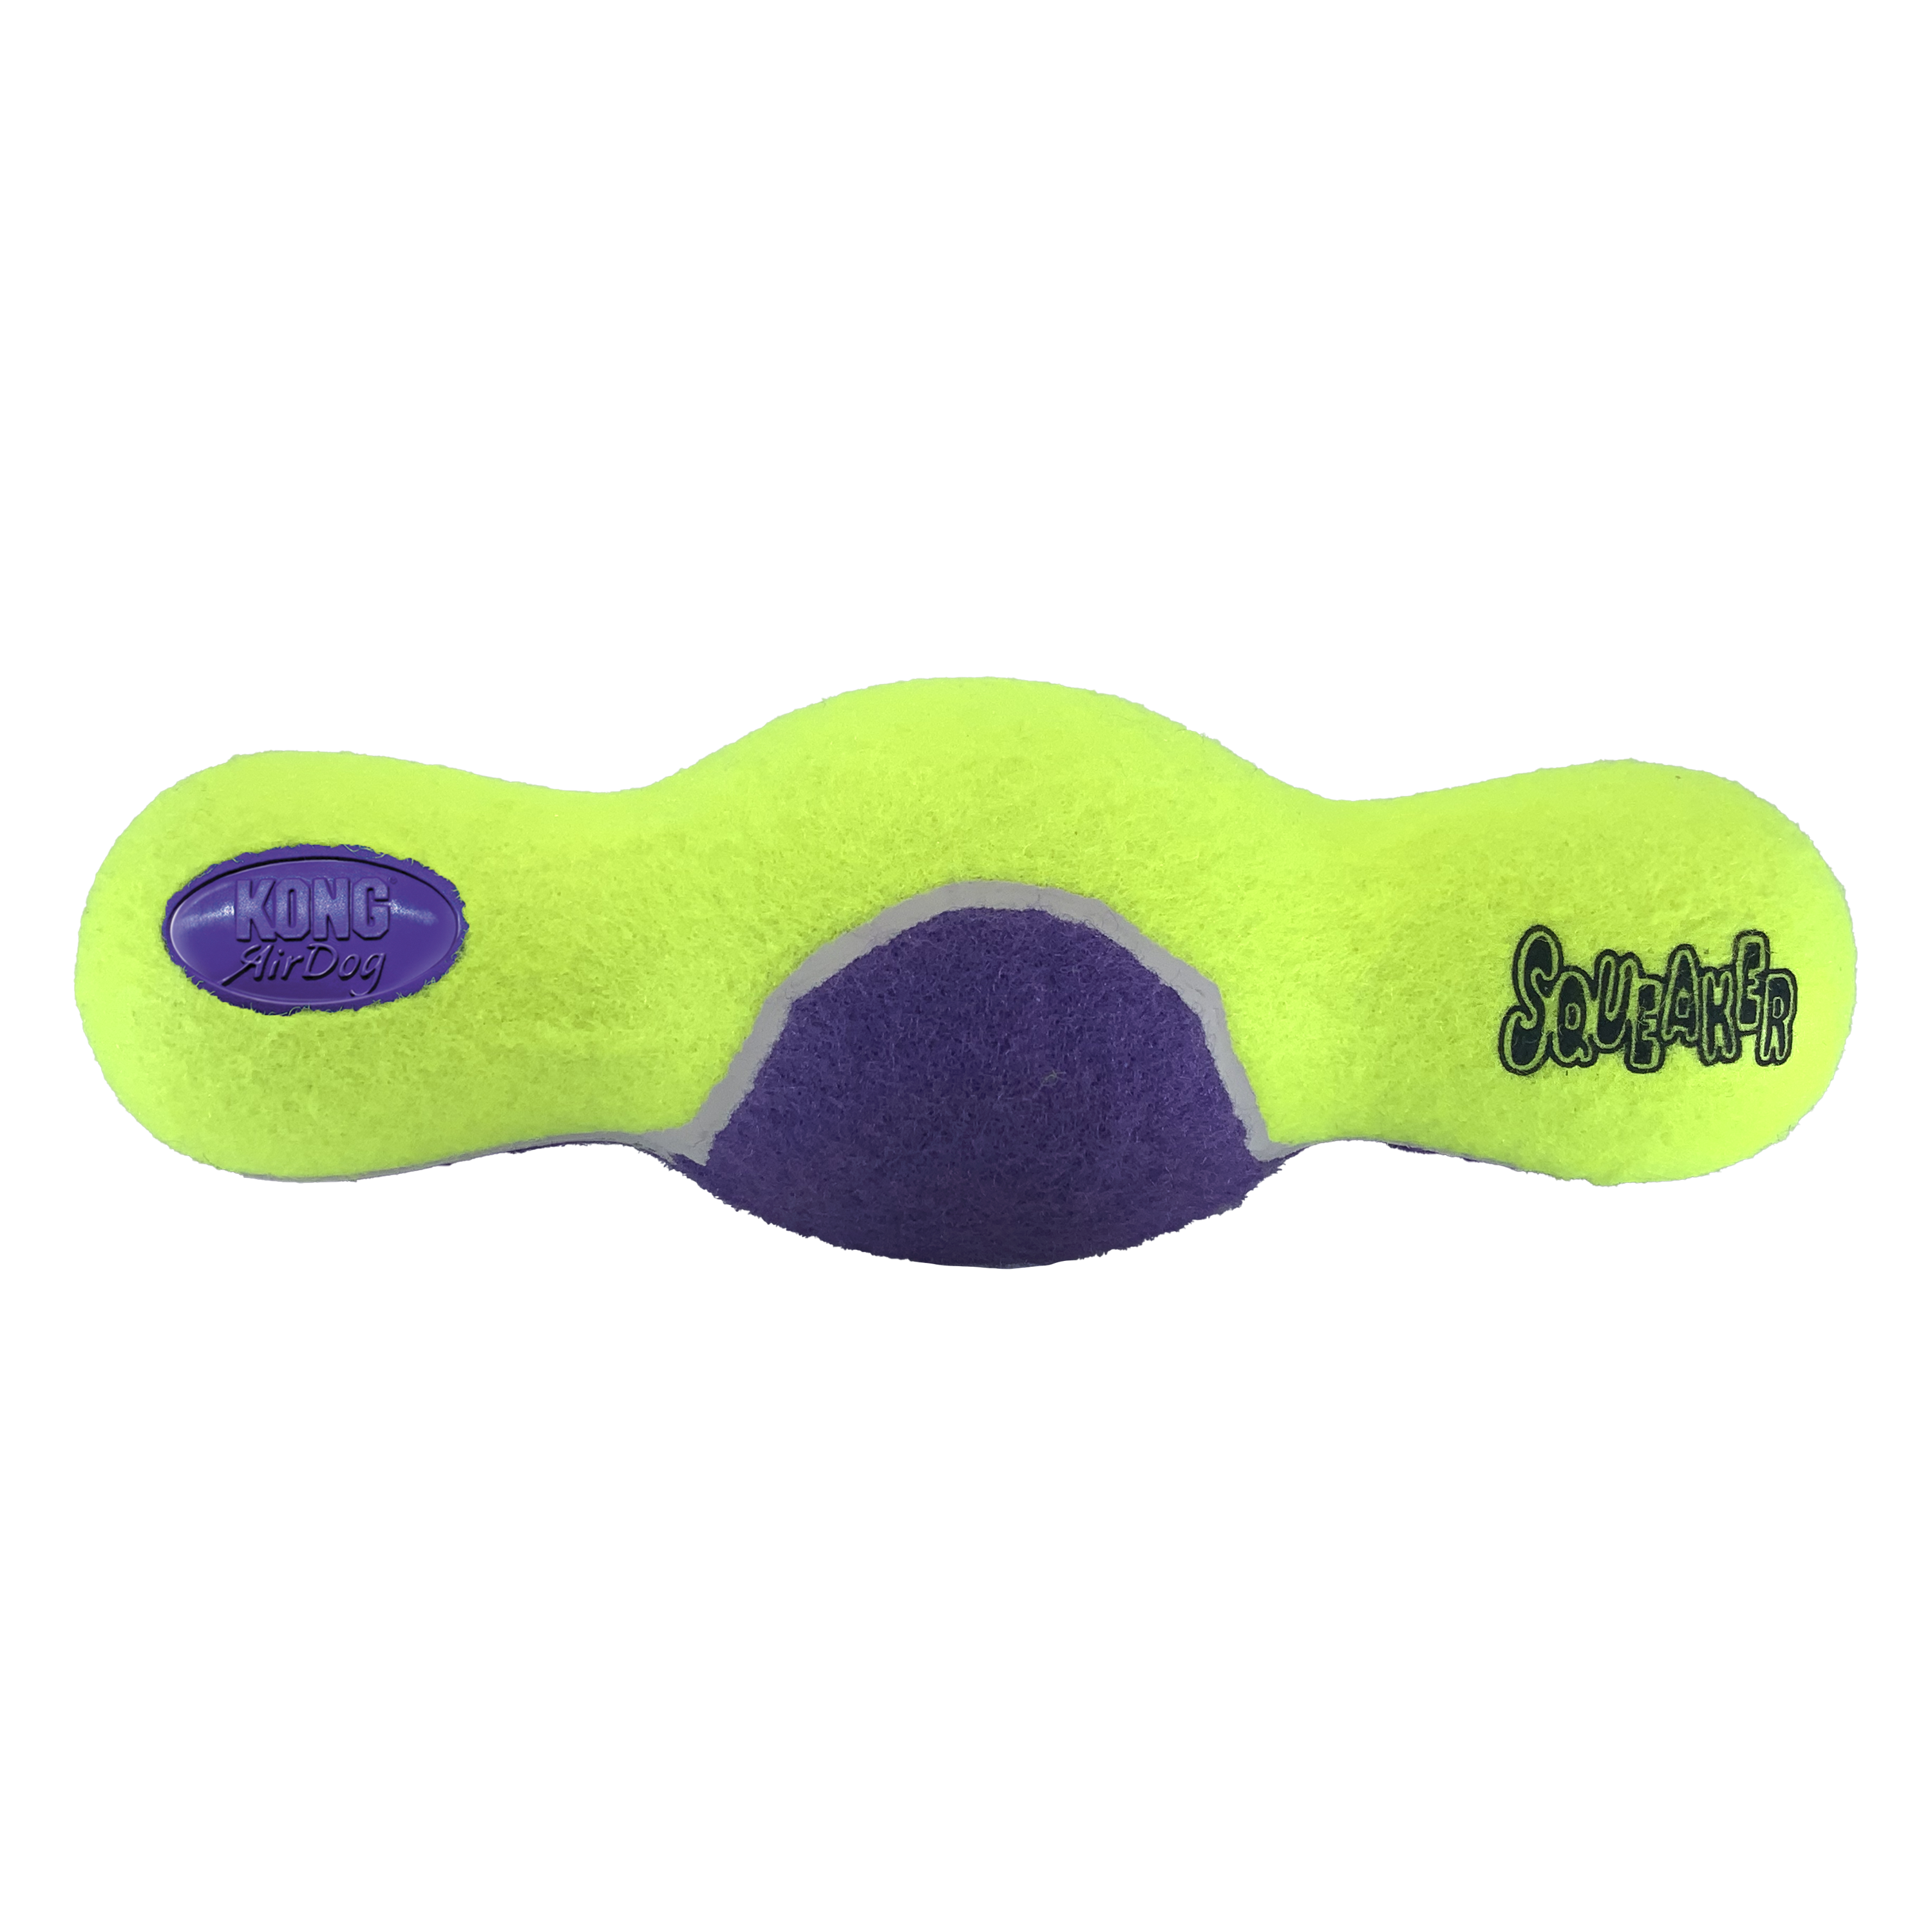 AirDog Squeaker Roller lifestyle product image